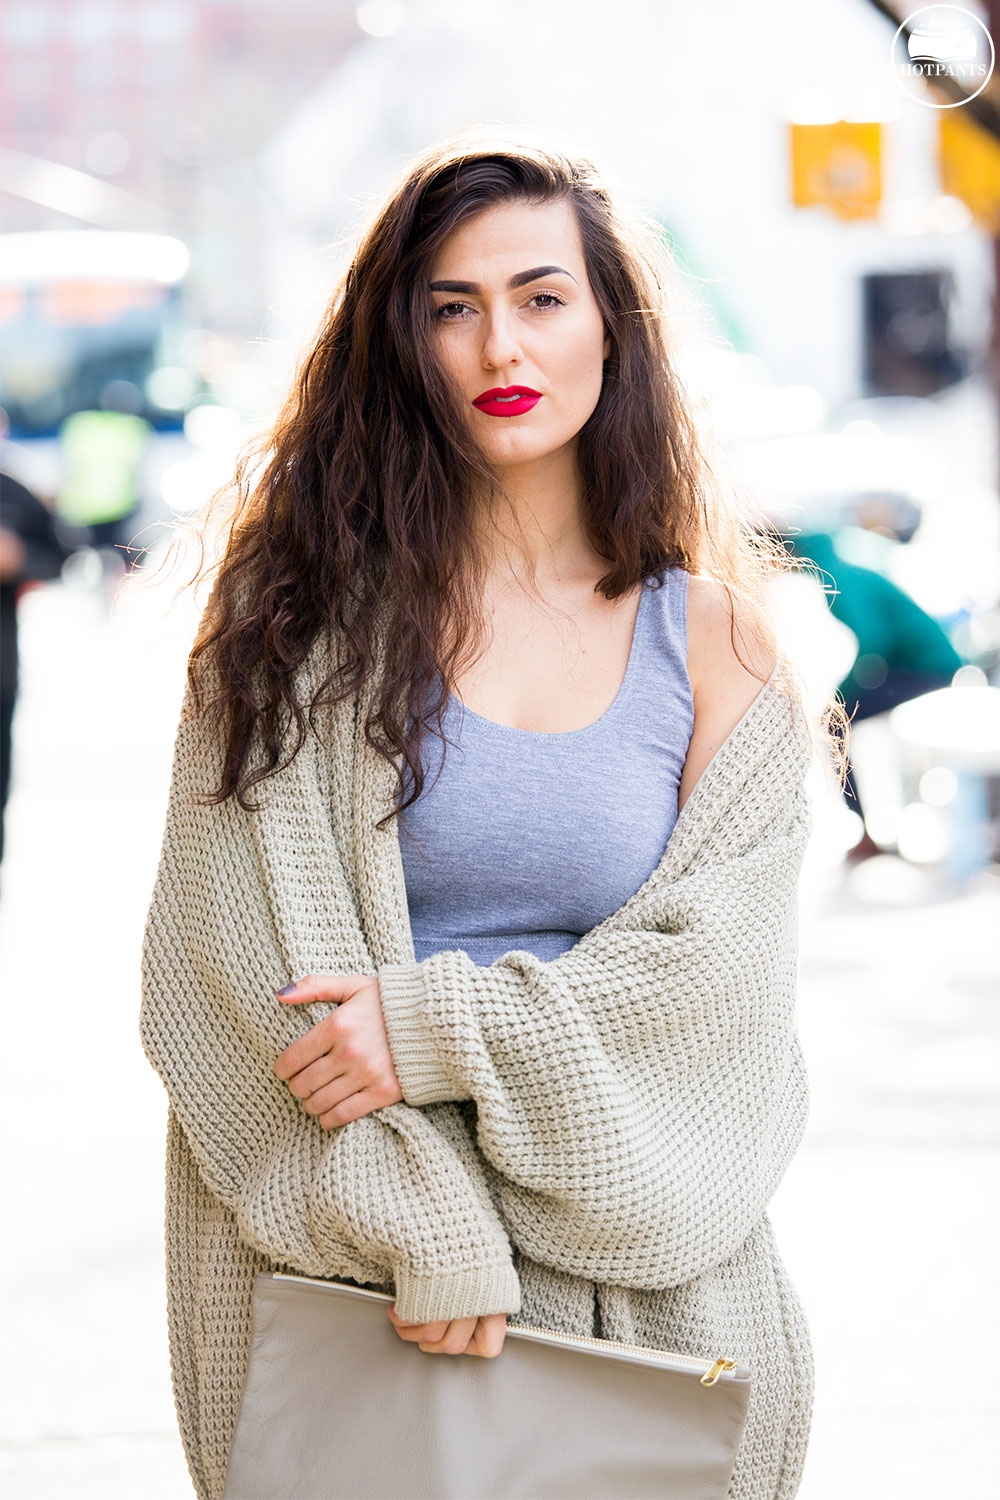 Long Hair Blogger New York City Fashion Winter Style Streetstyle What to wear in the winter